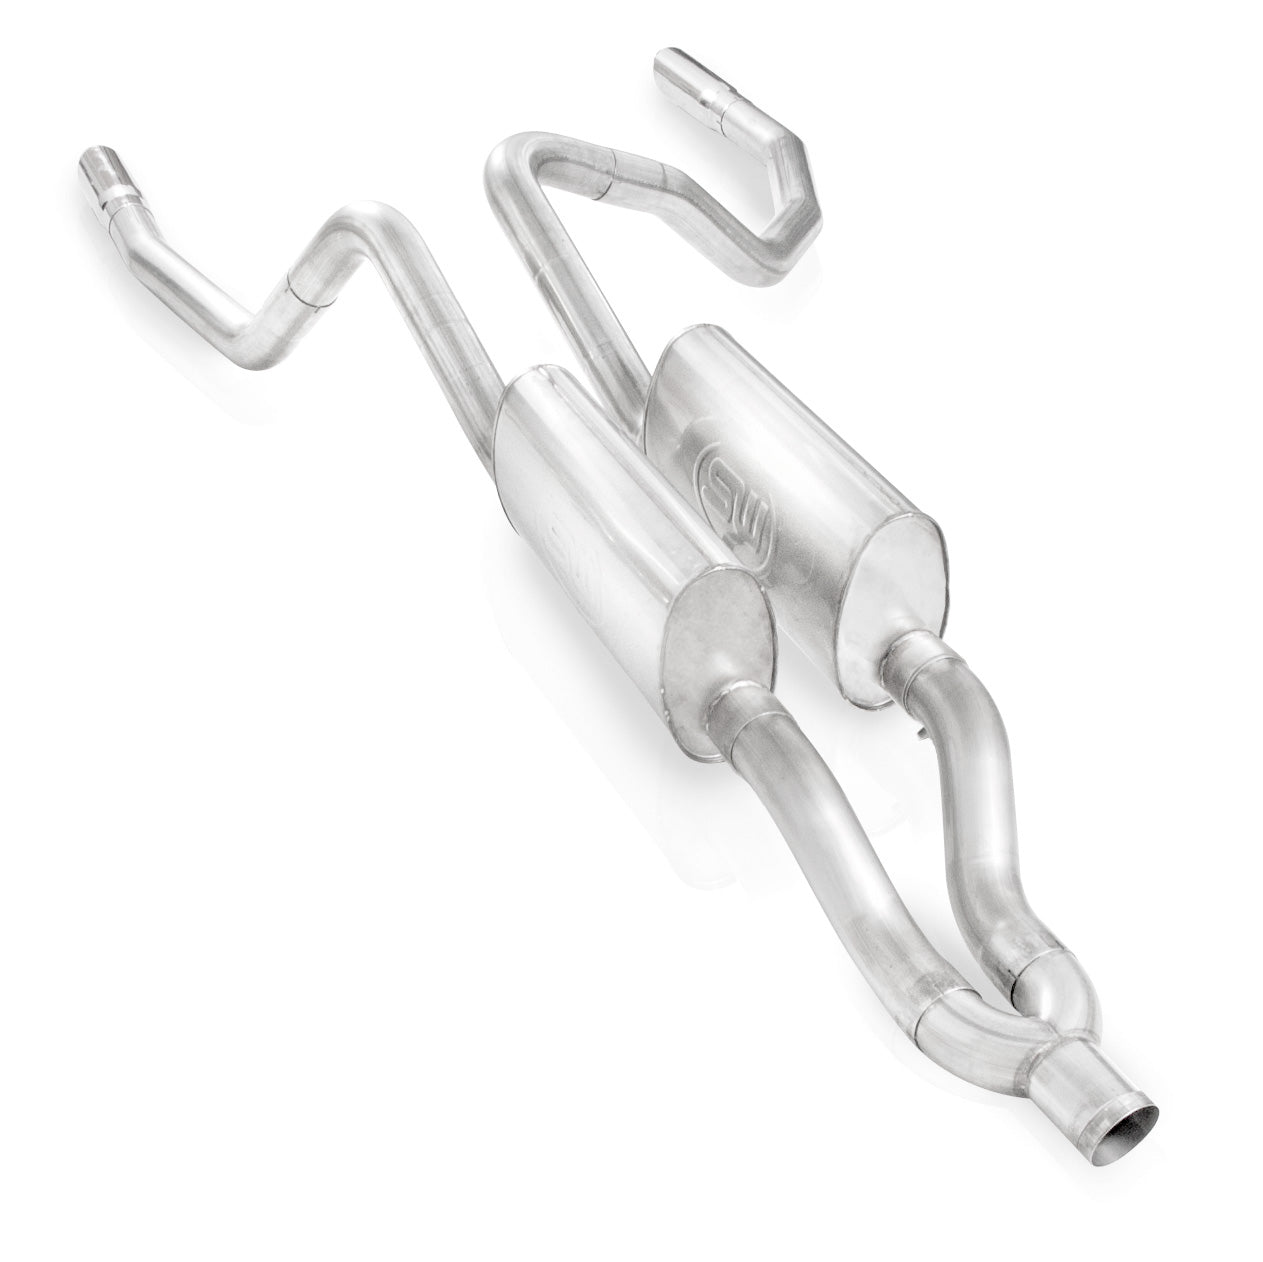 Ram 1500 (09-21) Stainless Works Turbo-S cat-back exhaust system